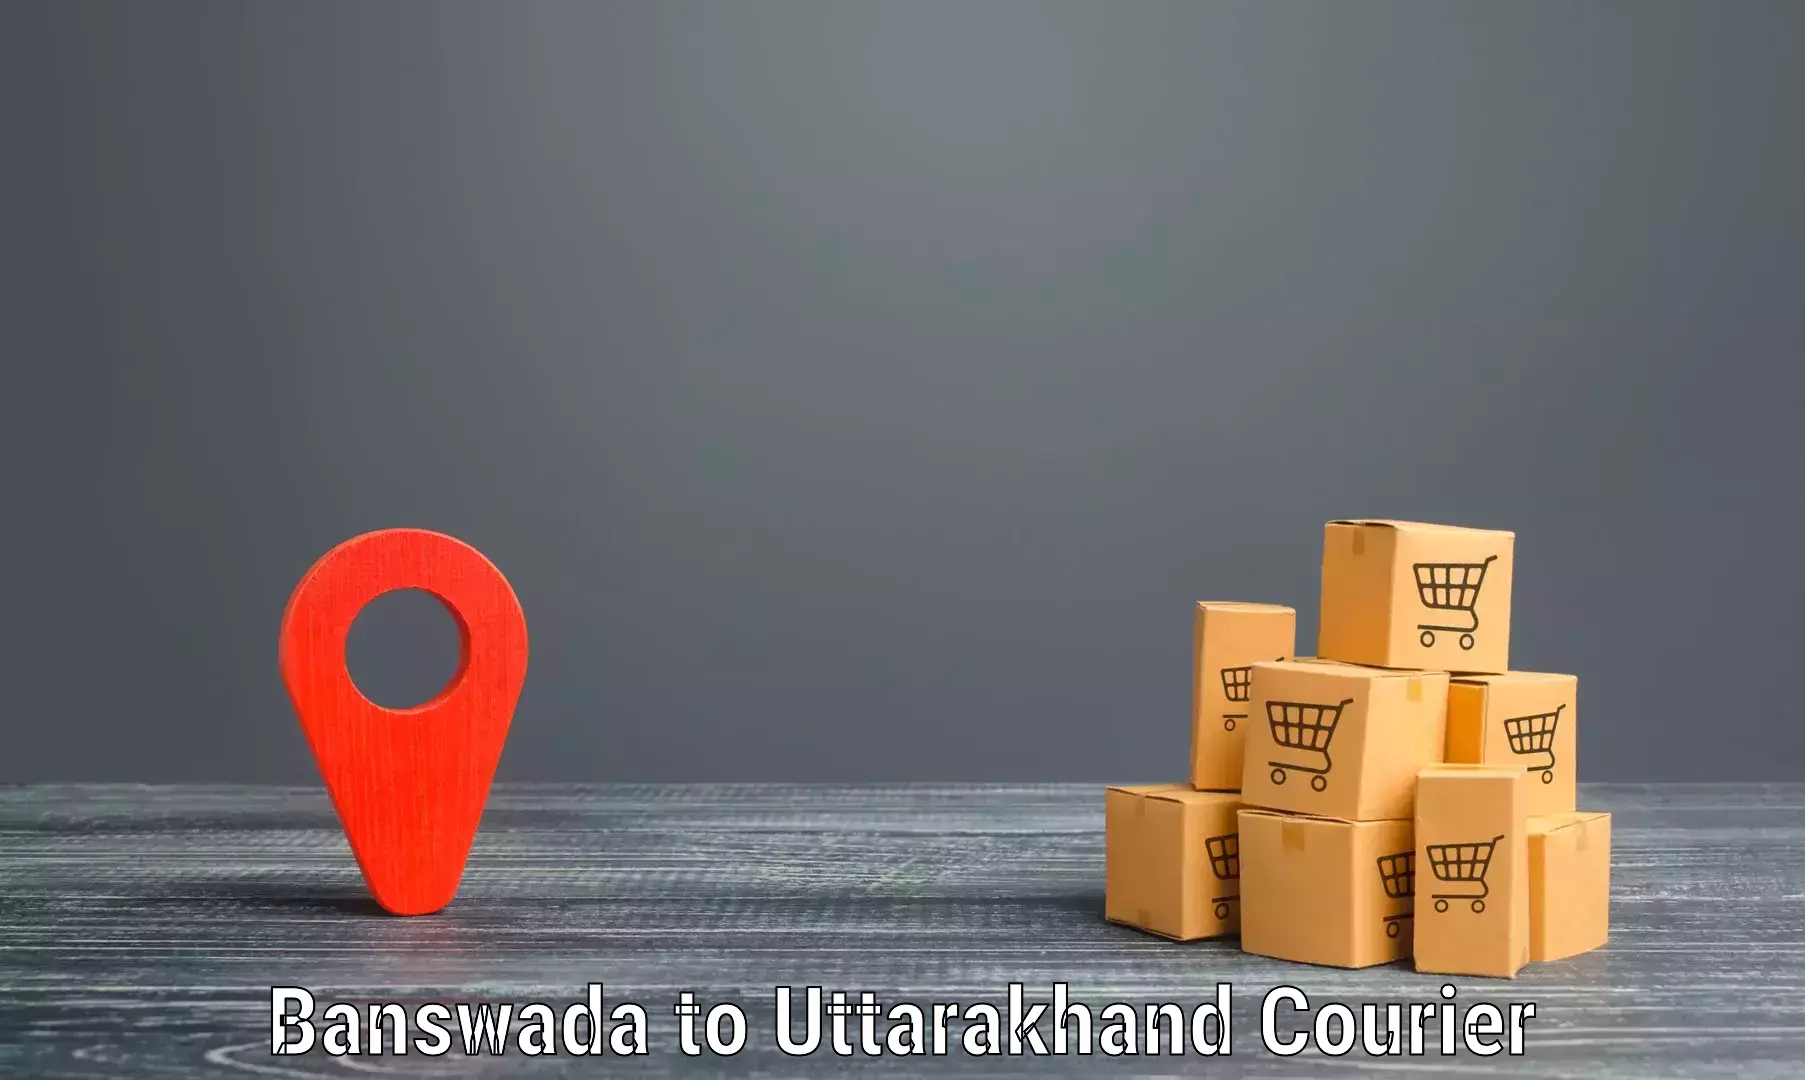 State-of-the-art courier technology Banswada to Tehri Garhwal